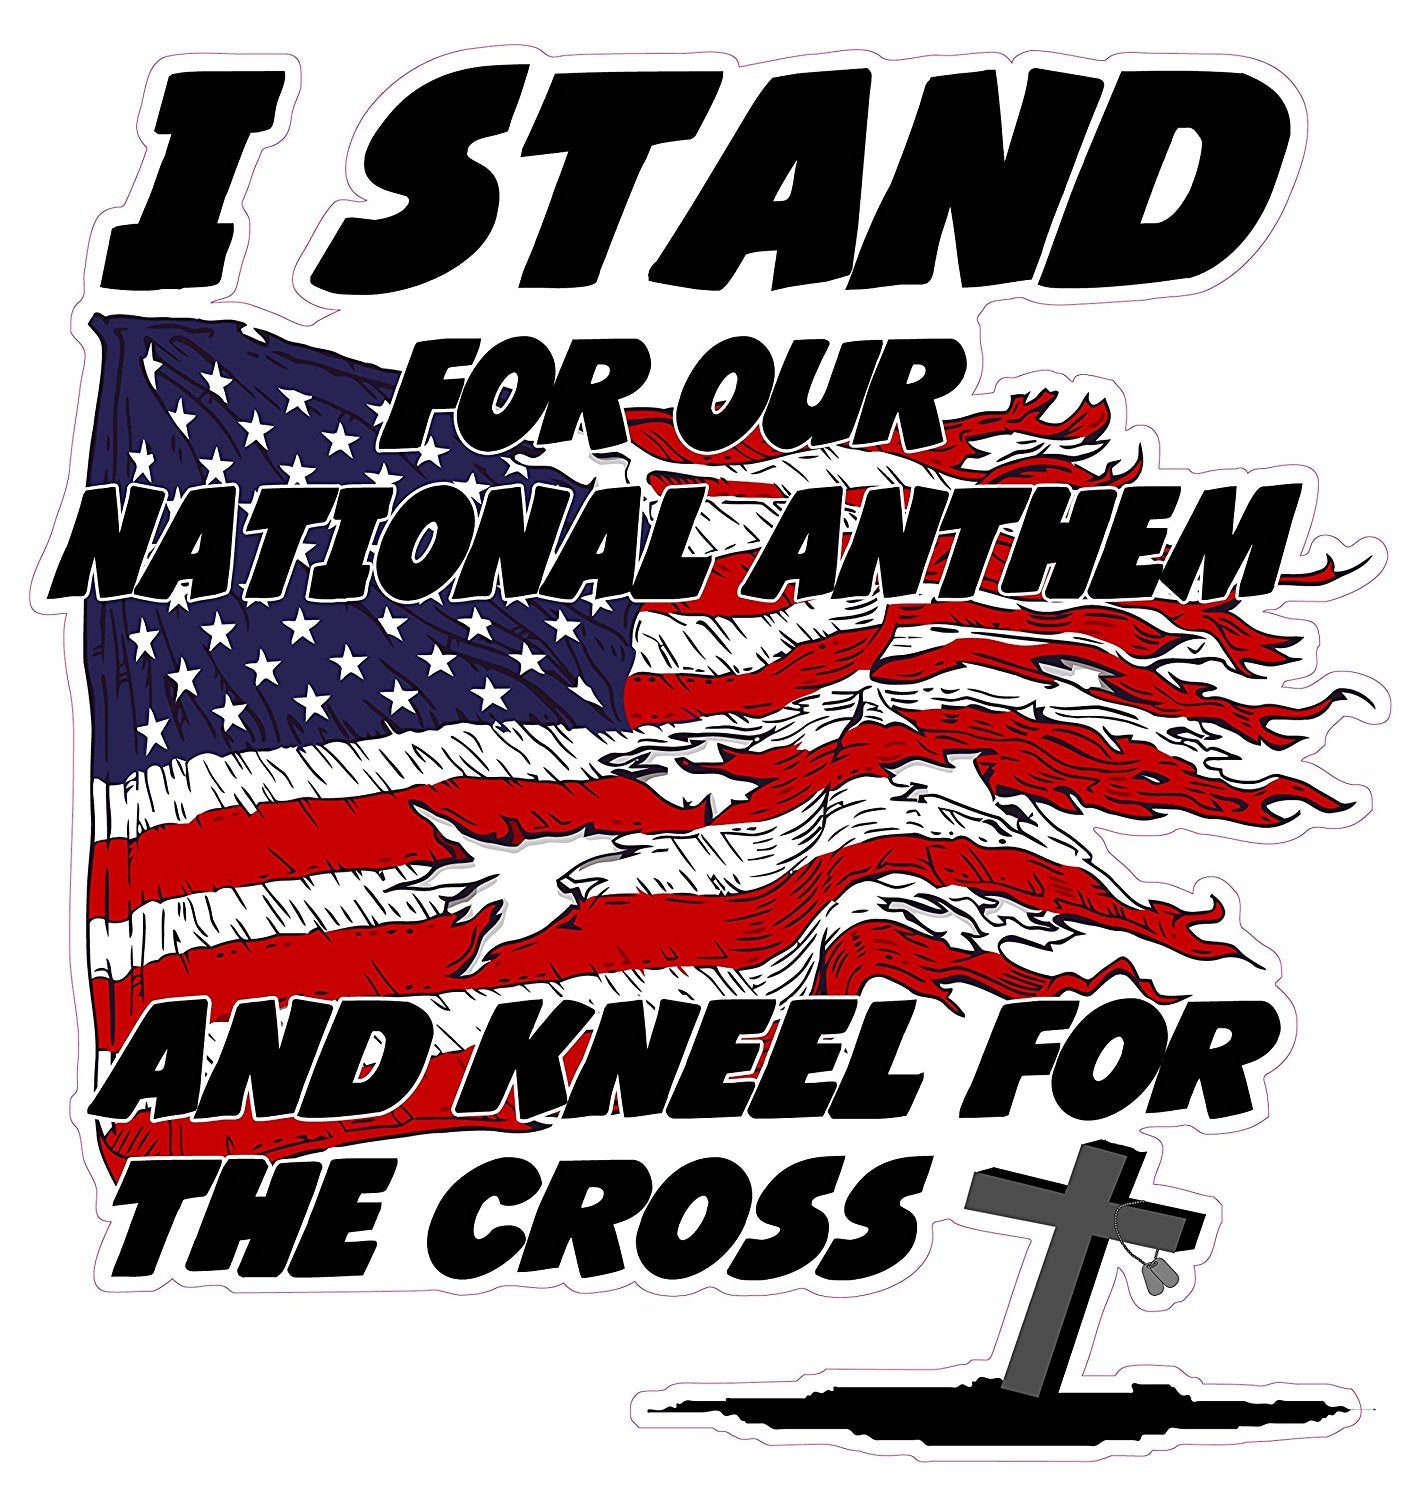 I Stand for the National Anthem and Kneel for the Cross Version 1 Decal - American Bald Eagle, American bald eagle decal, American eagle, American Eagle American Flag Decal, American flag, American flag decals, American flag eagle decals, American flag stickers, automotive decals, automotive stickers, bumper decals, bumper stickers, decals, eagle decals, eagle flag, eagle stickers, i stand for the flag, I stand for the national anthem and kneel for the cross decal, I stand for the national anthe